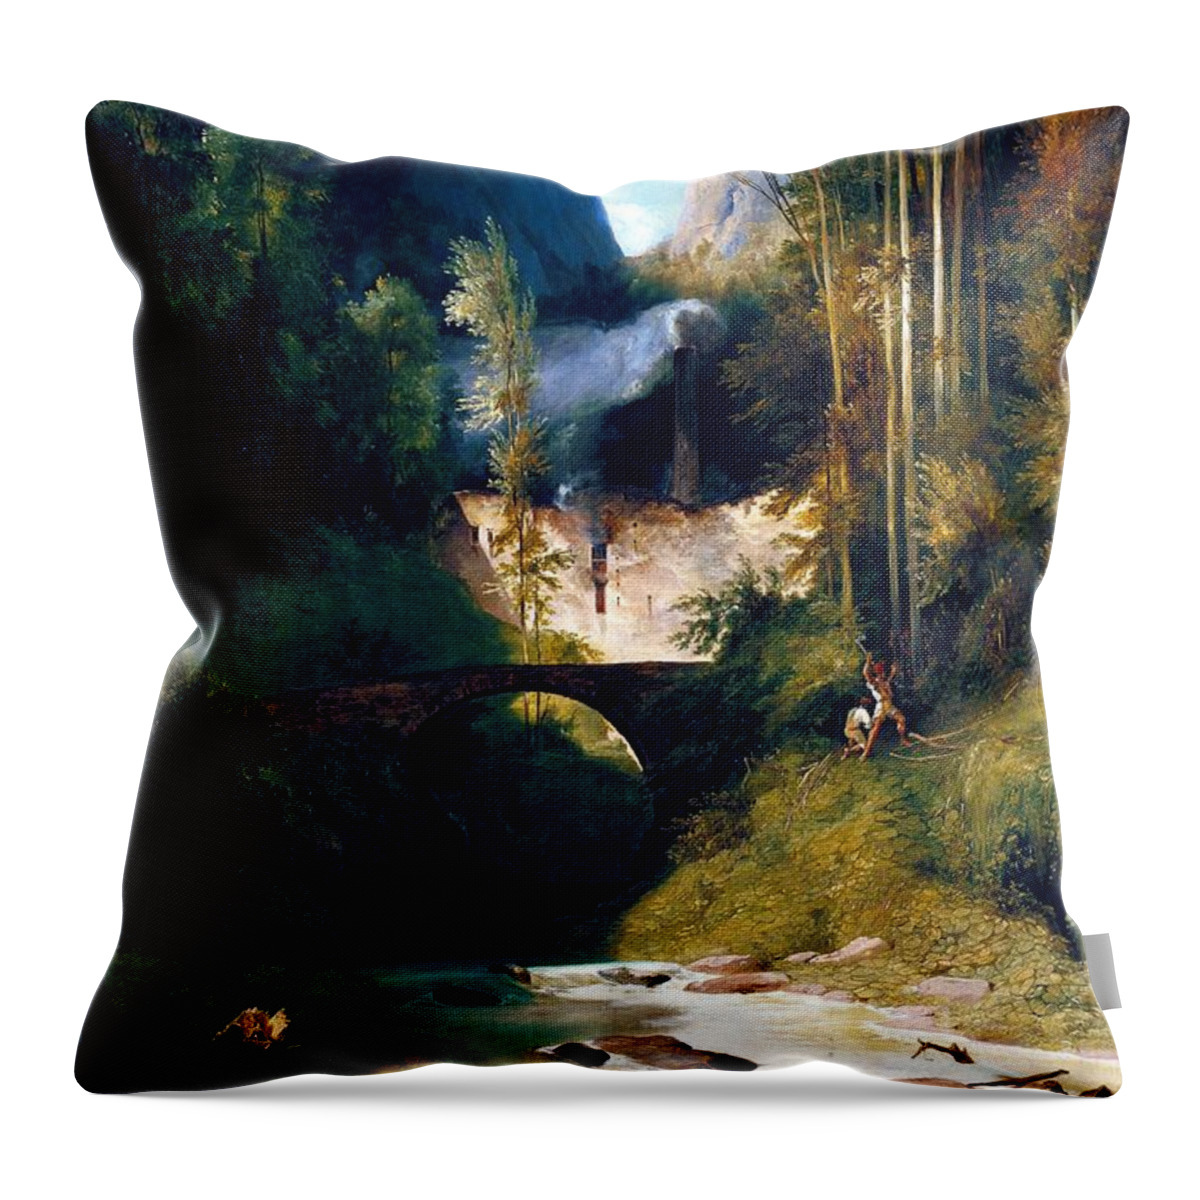 Pd: Reproduction Throw Pillow featuring the painting Gola vicino ad Amalfi by Thea Recuerdo